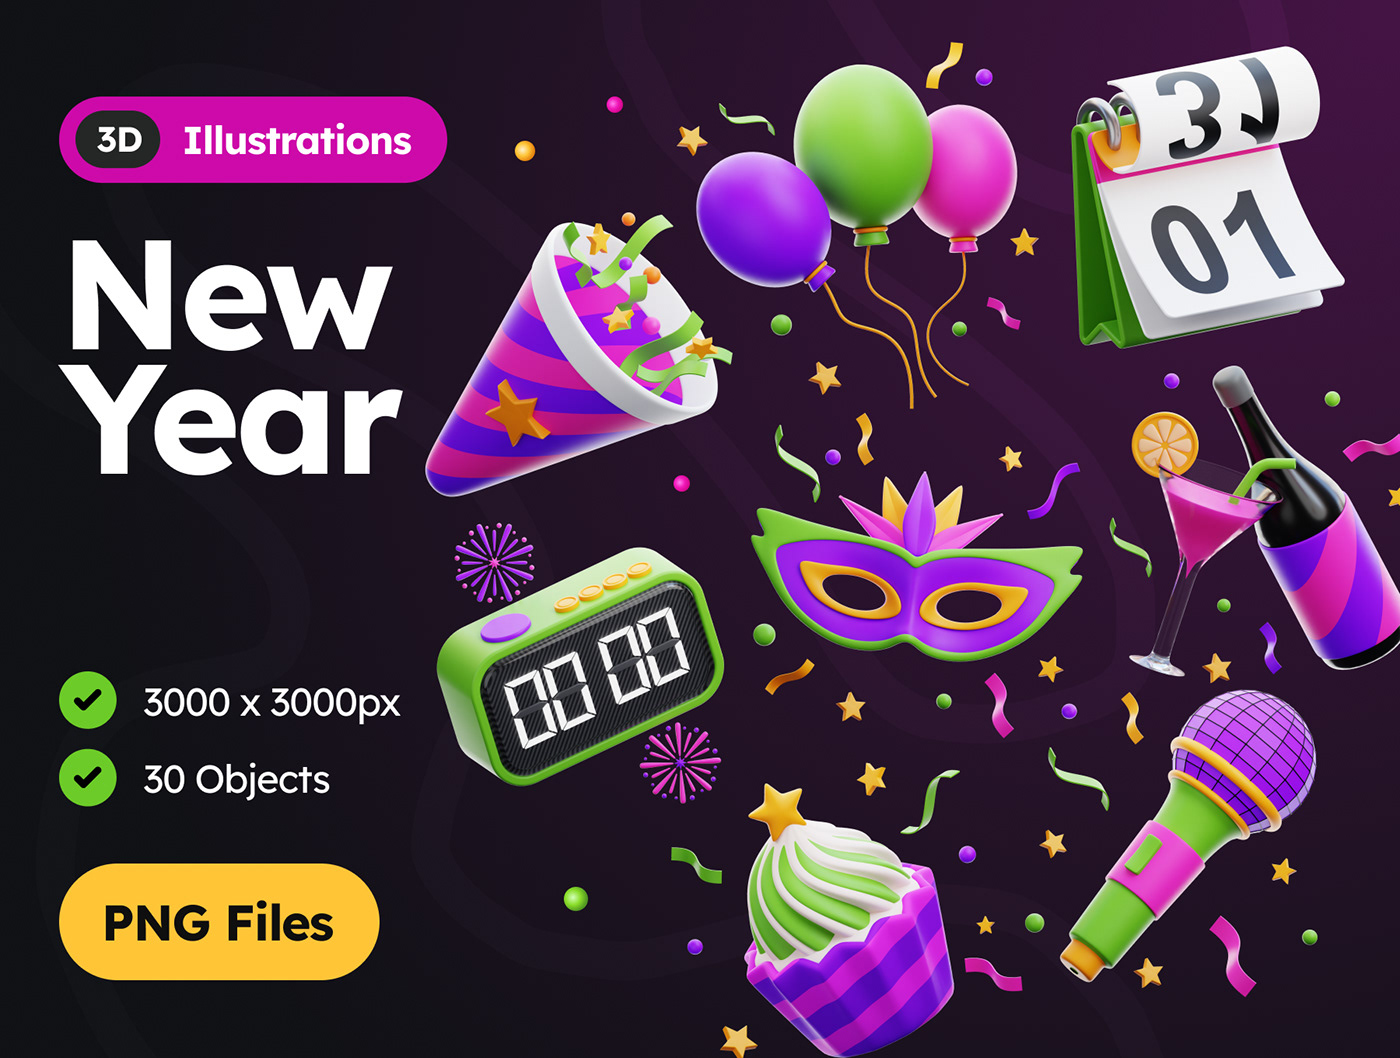 3D 3d icon blender 3d modeling new year party Icon Render Christmas ILLUSTRATION 